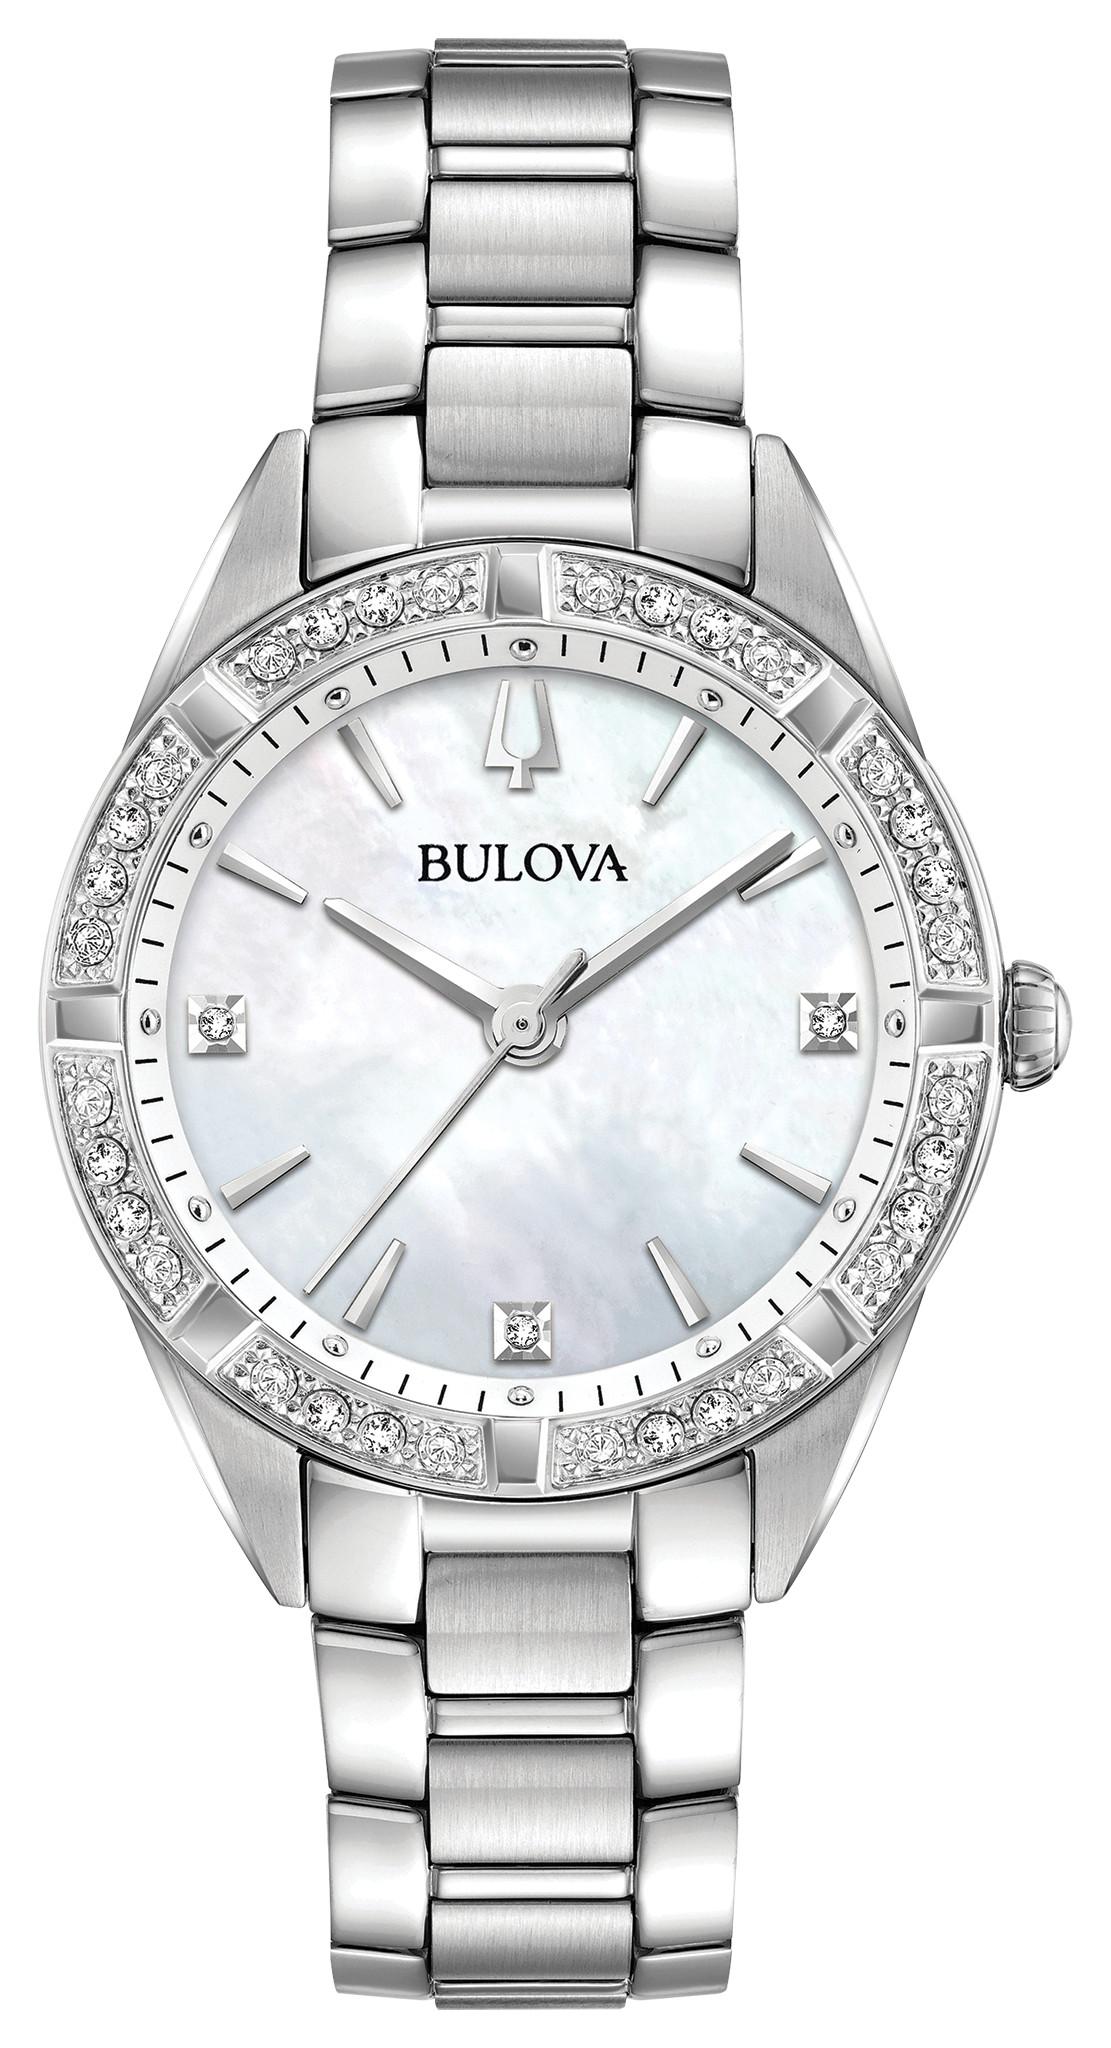 Bulova Introduces New Additions To Aerojet, Sutton, & Surveyor Collections  | aBlogtoWatch